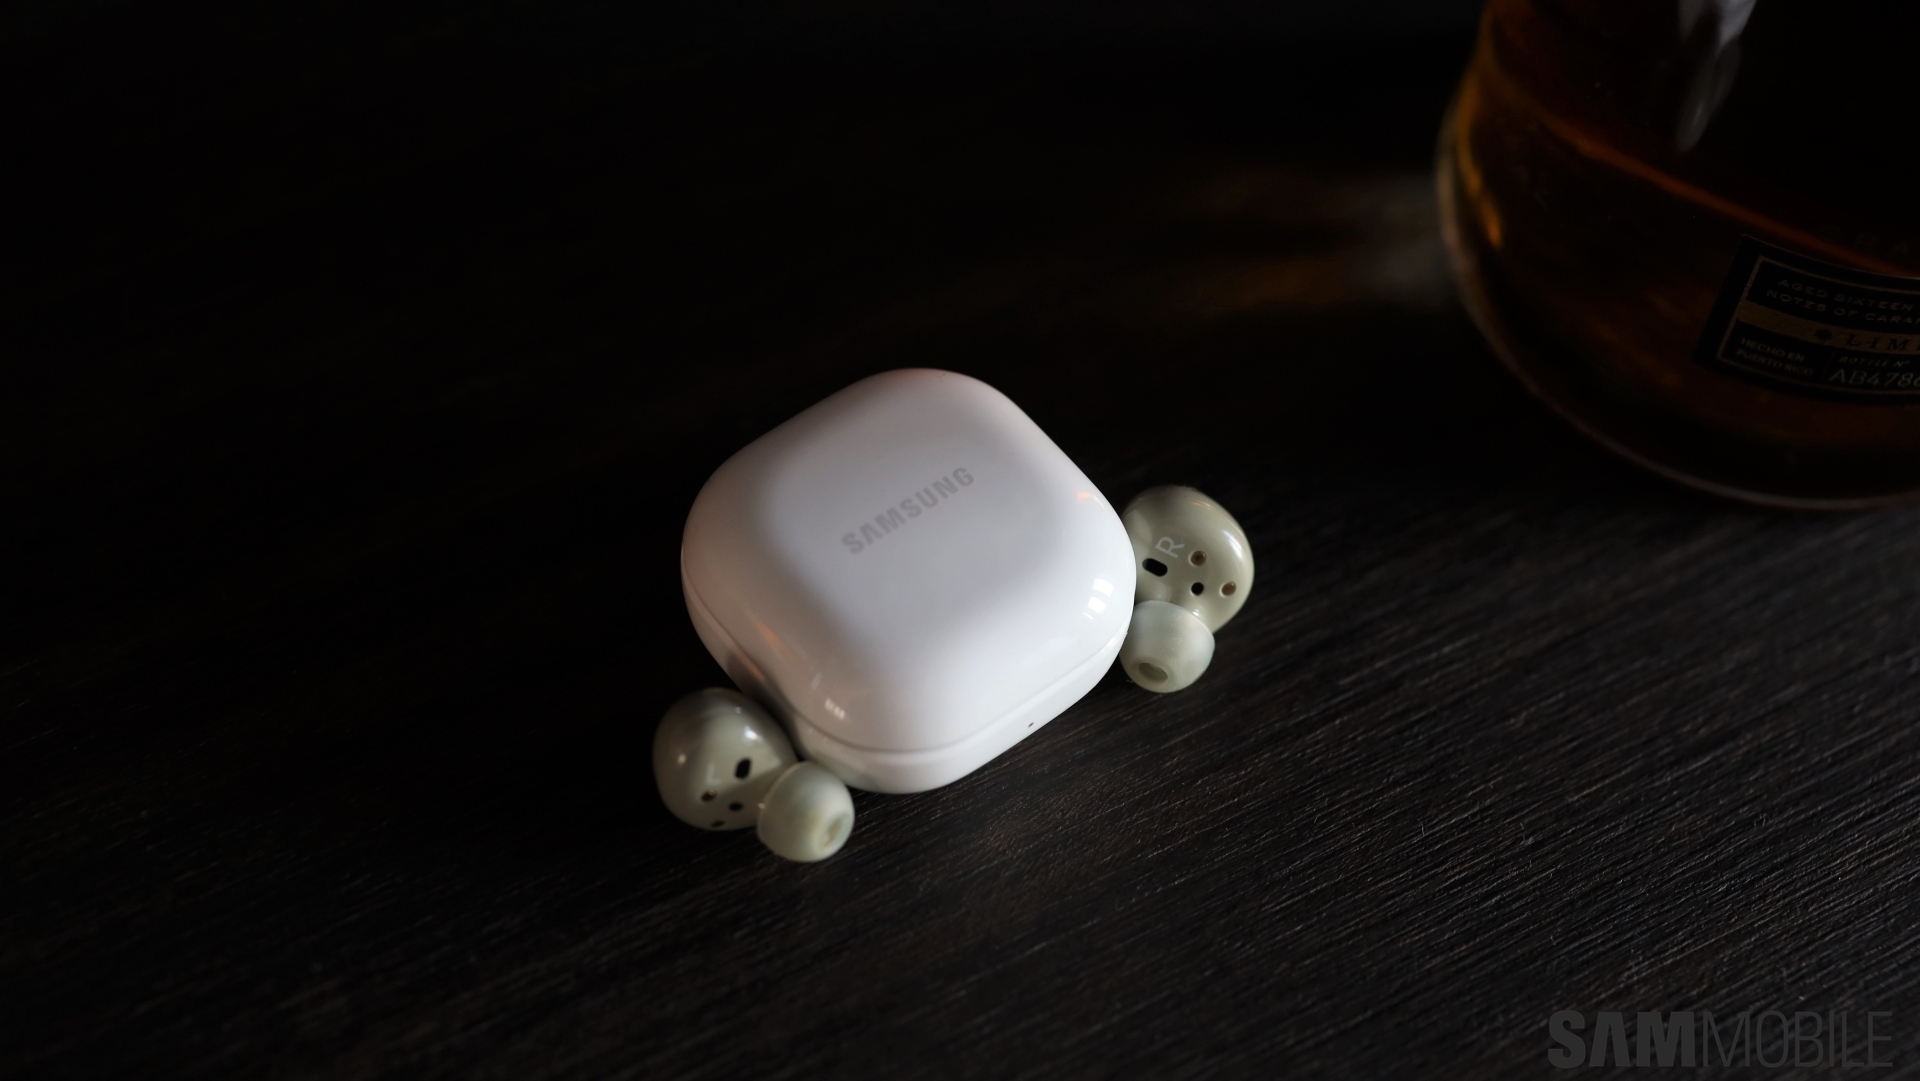 Samsung Galaxy Buds Plus review: Still great in 2021?